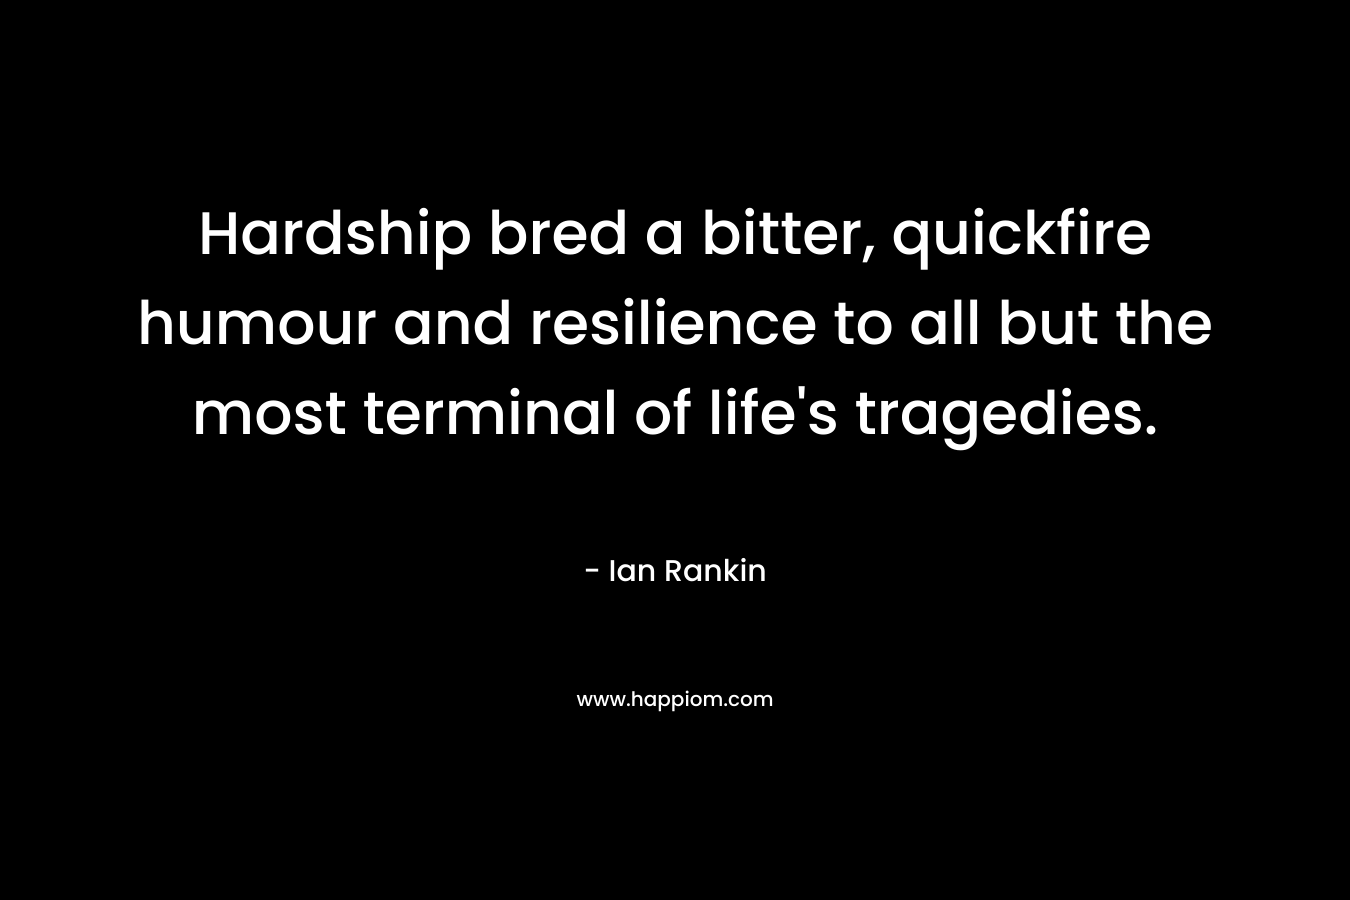 Hardship bred a bitter, quickfire humour and resilience to all but the most terminal of life's tragedies.